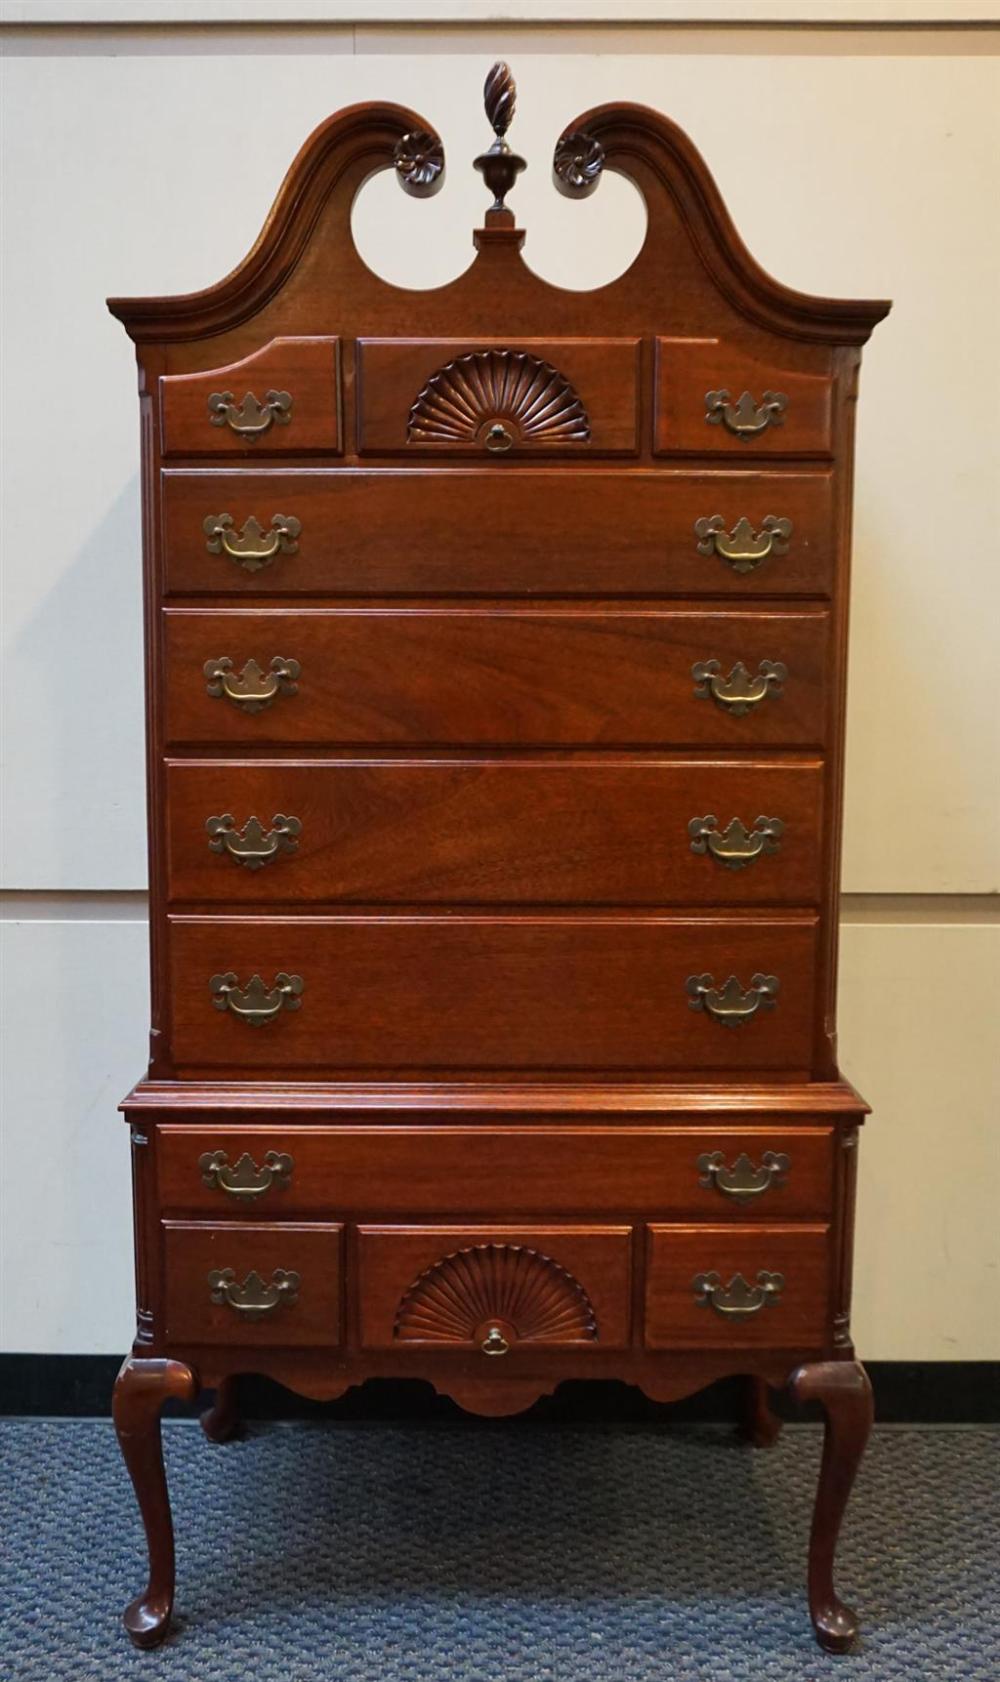 KLING QUEEN ANNE STYLE MAHOGANY 328e37